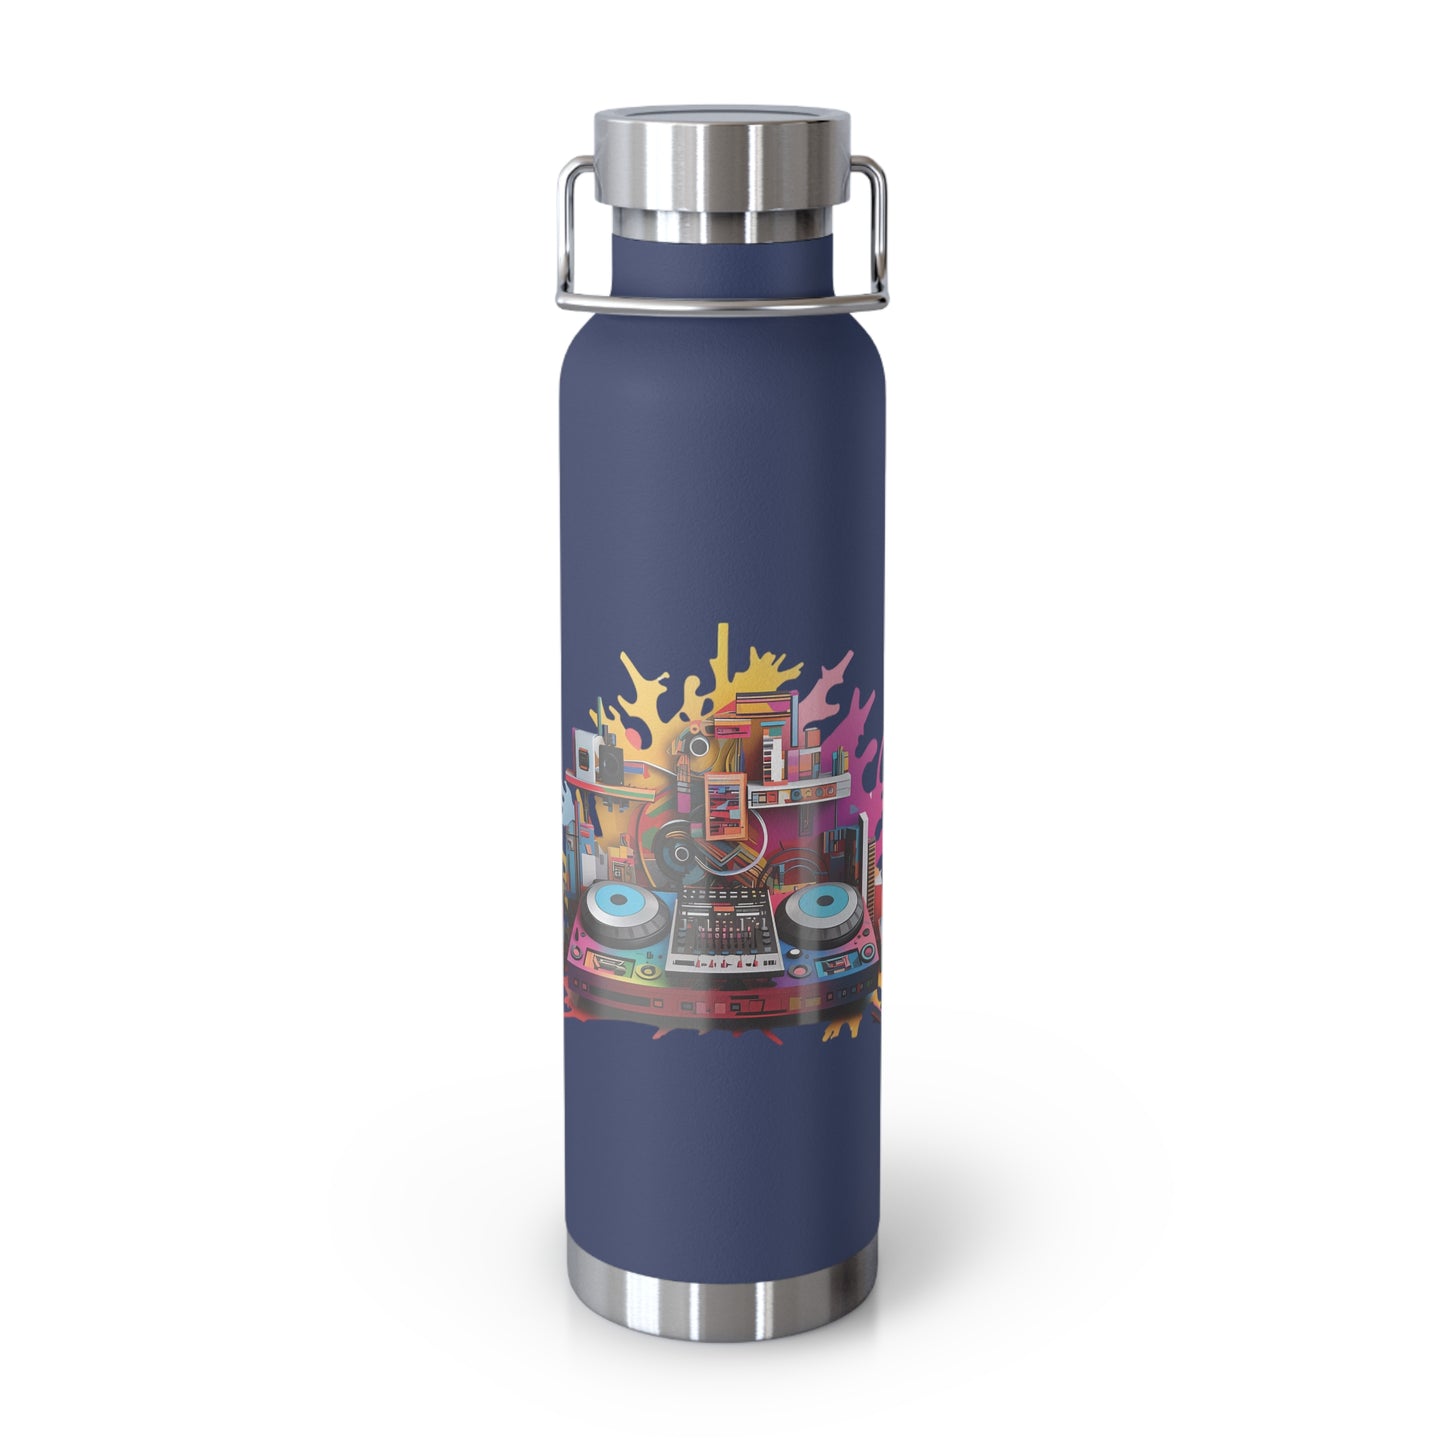 DJ Spinning Music Setup Abstract Design - 22 oz Copper Vacuum Insulated Bottle Multiple Colors